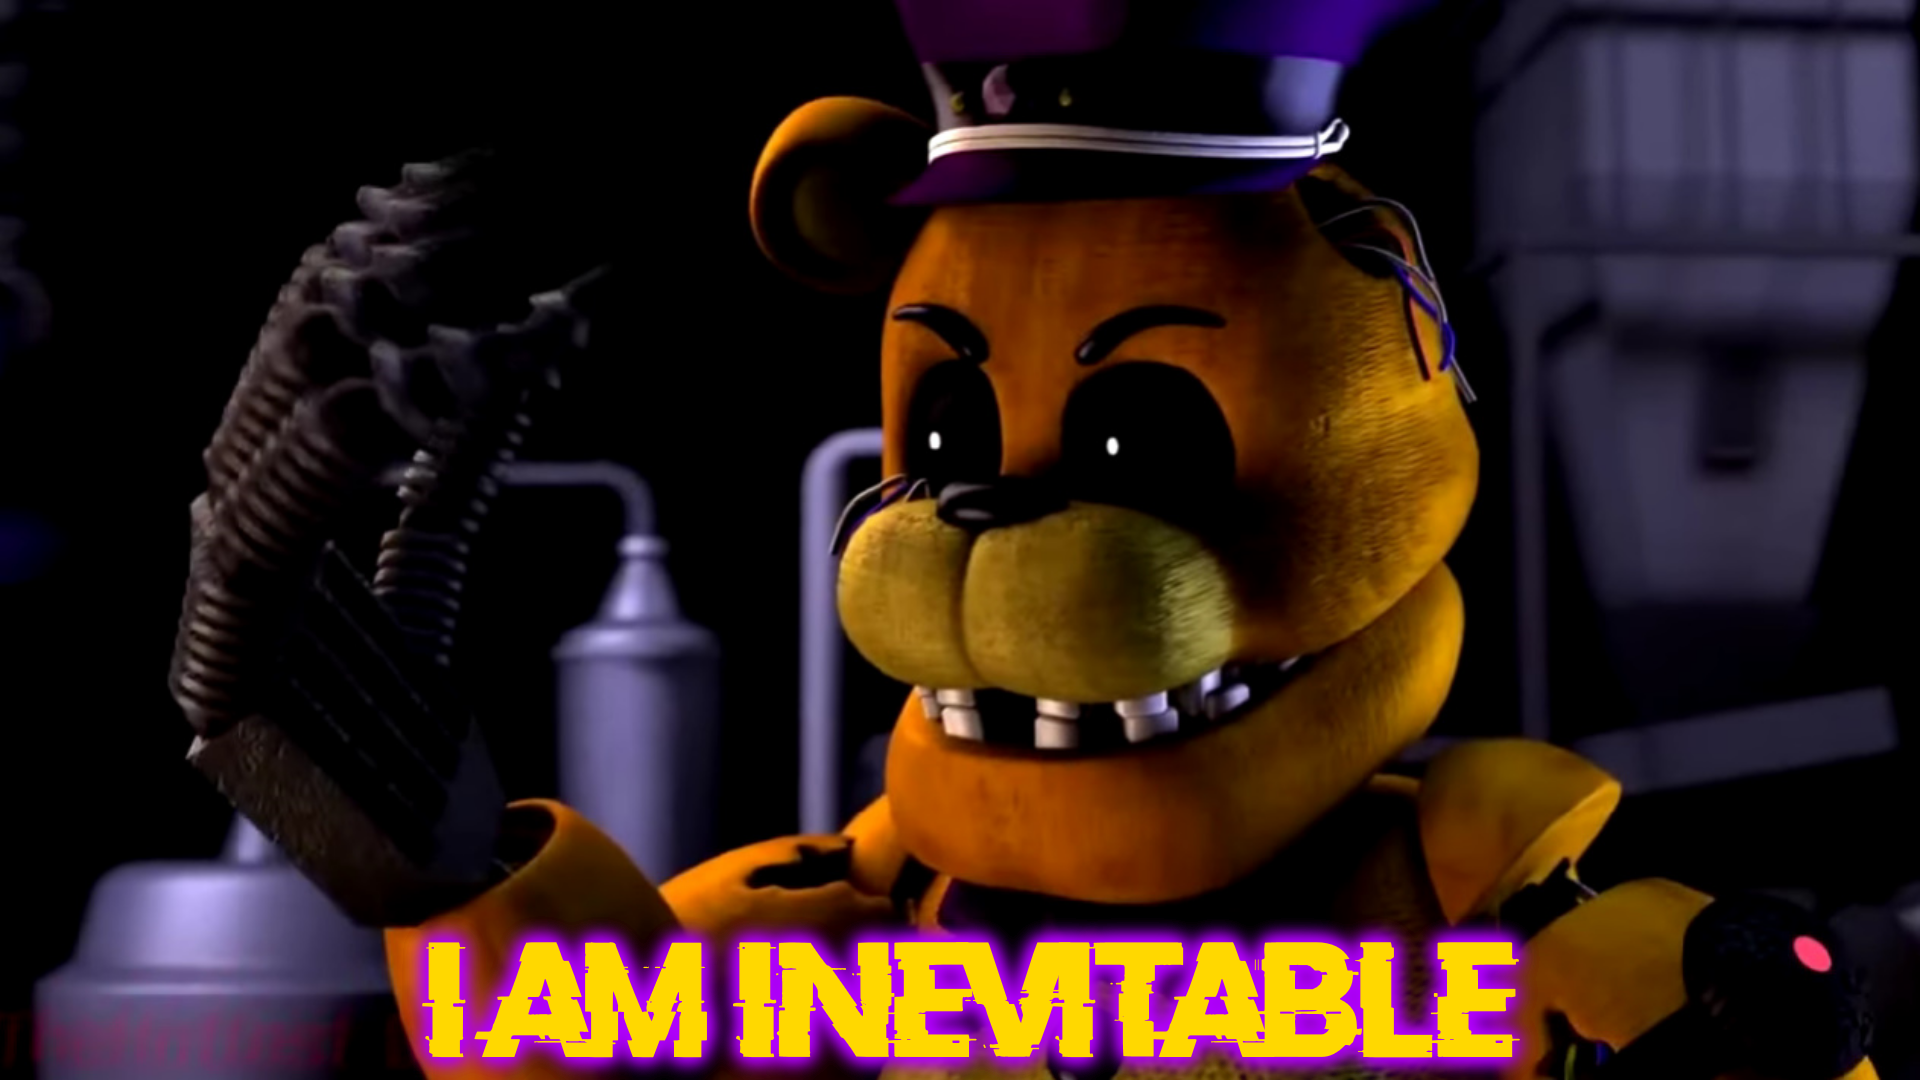 The Five Nights rises by CAcartoonfan on DeviantArt